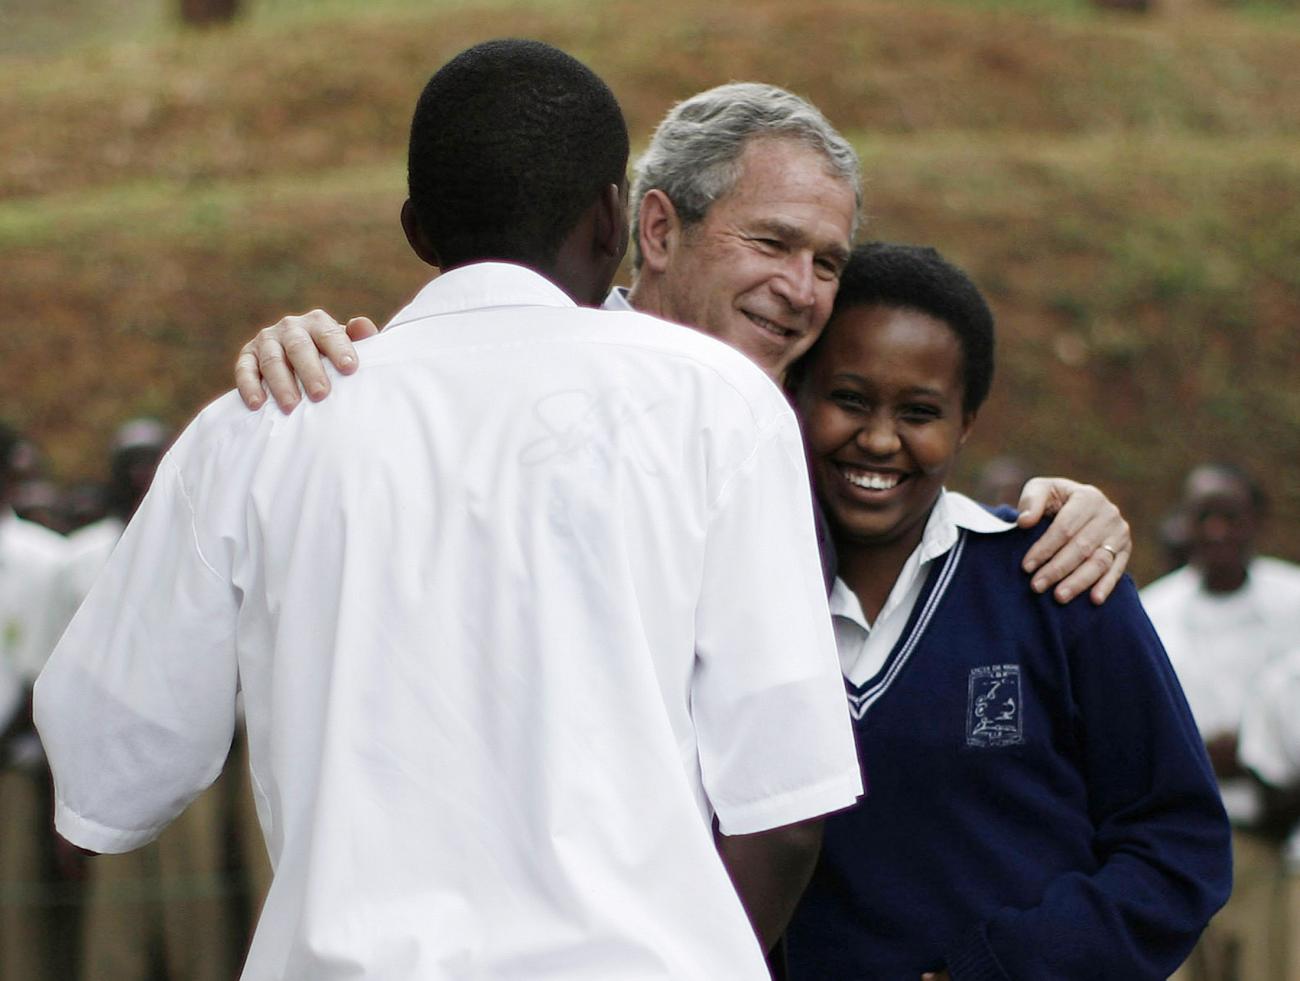 U.S. President George W. Bush hugs two students who had just performed a play for him on the subject of abstaining from sex as a way to avoid HIV/AIDS and teenage pregnancy, during his visit to the Lycee de Kigali school in Kigali, Rwanda, February 19, 2008.